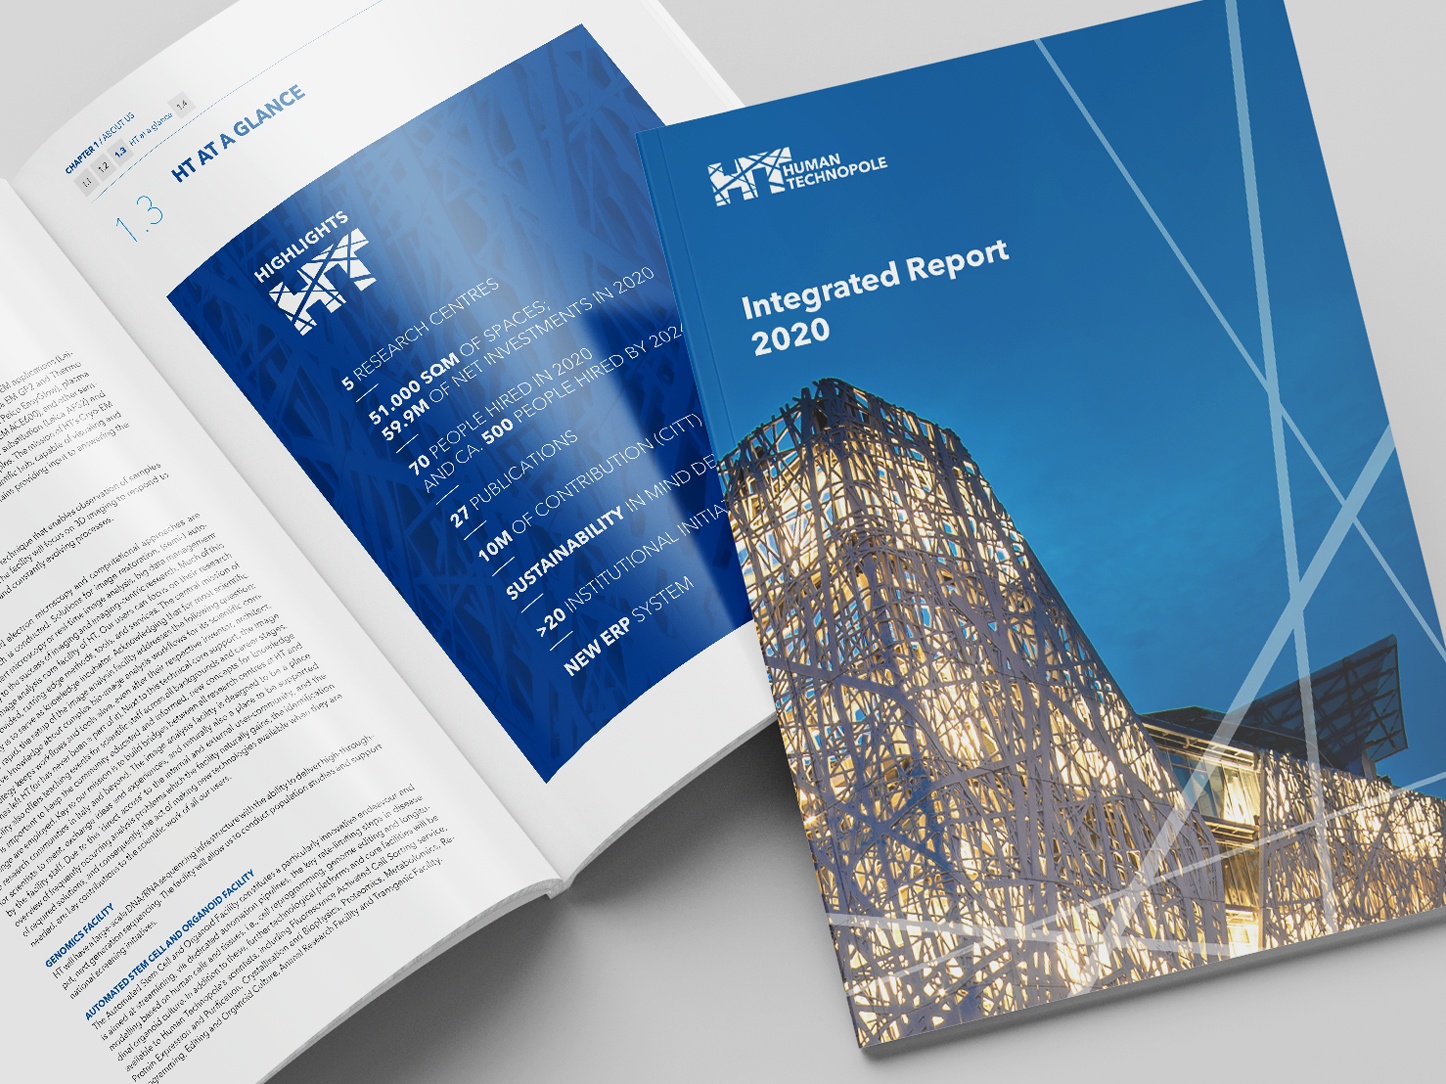 Presenting the first edition of our Integrated Report